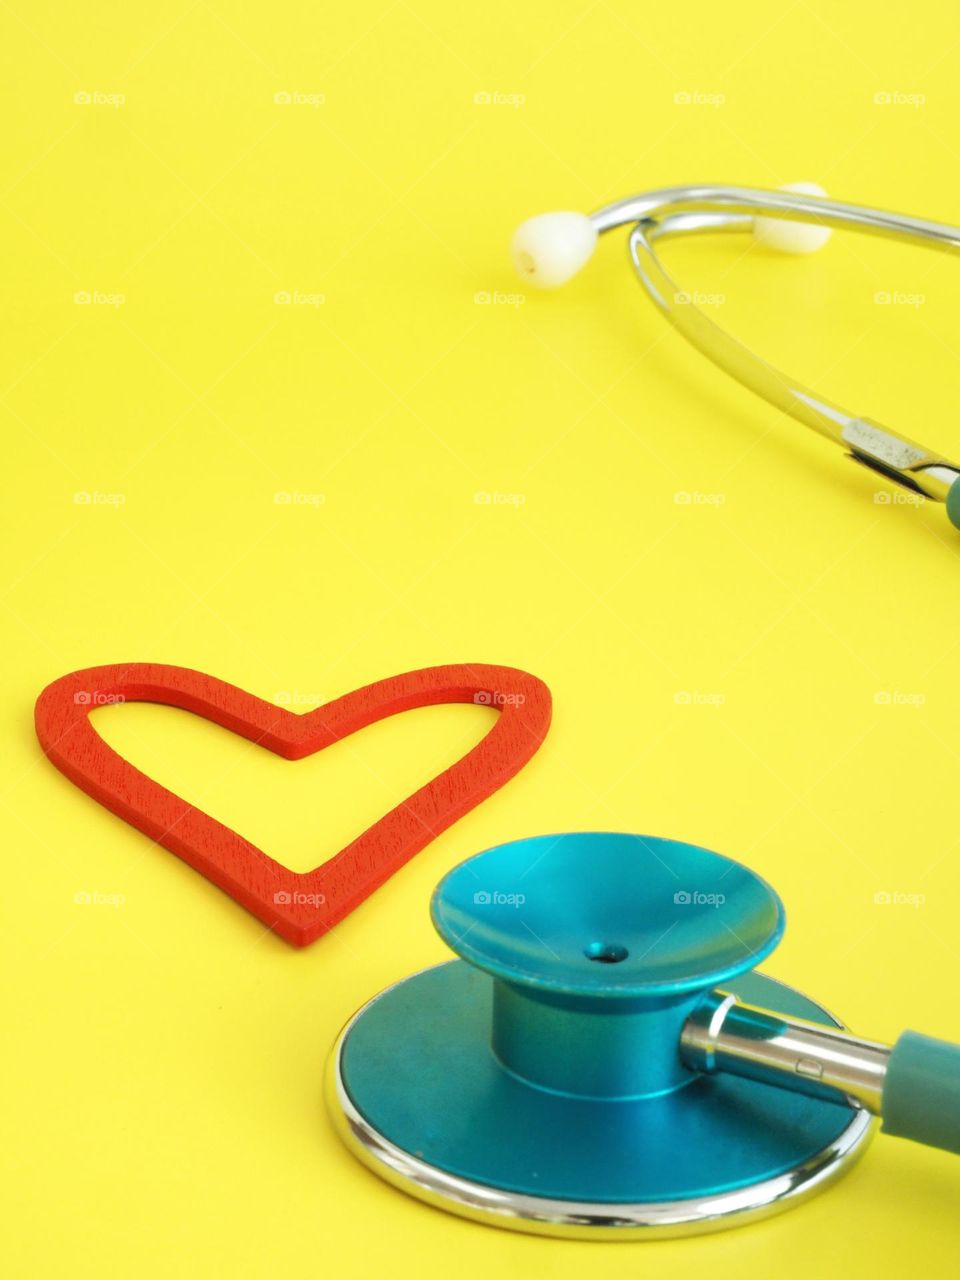 Blue stethoscope and Red heart